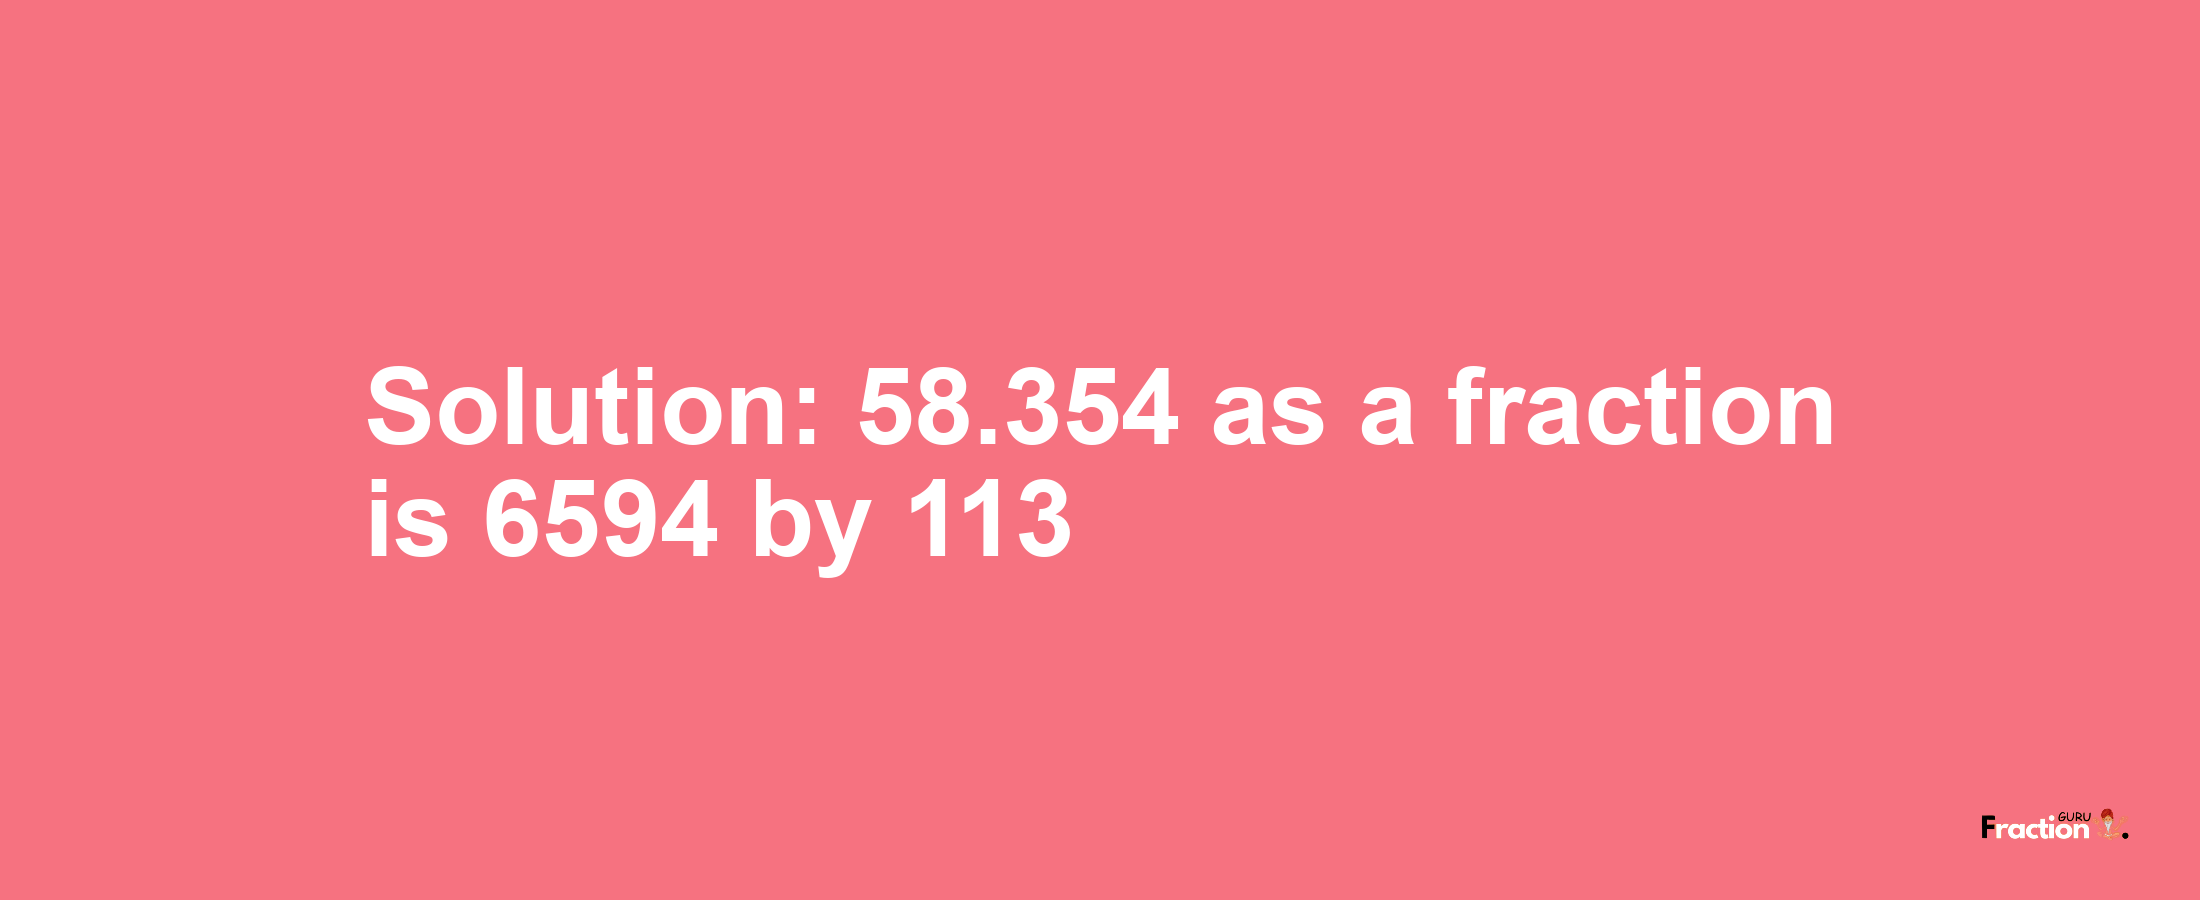 Solution:58.354 as a fraction is 6594/113